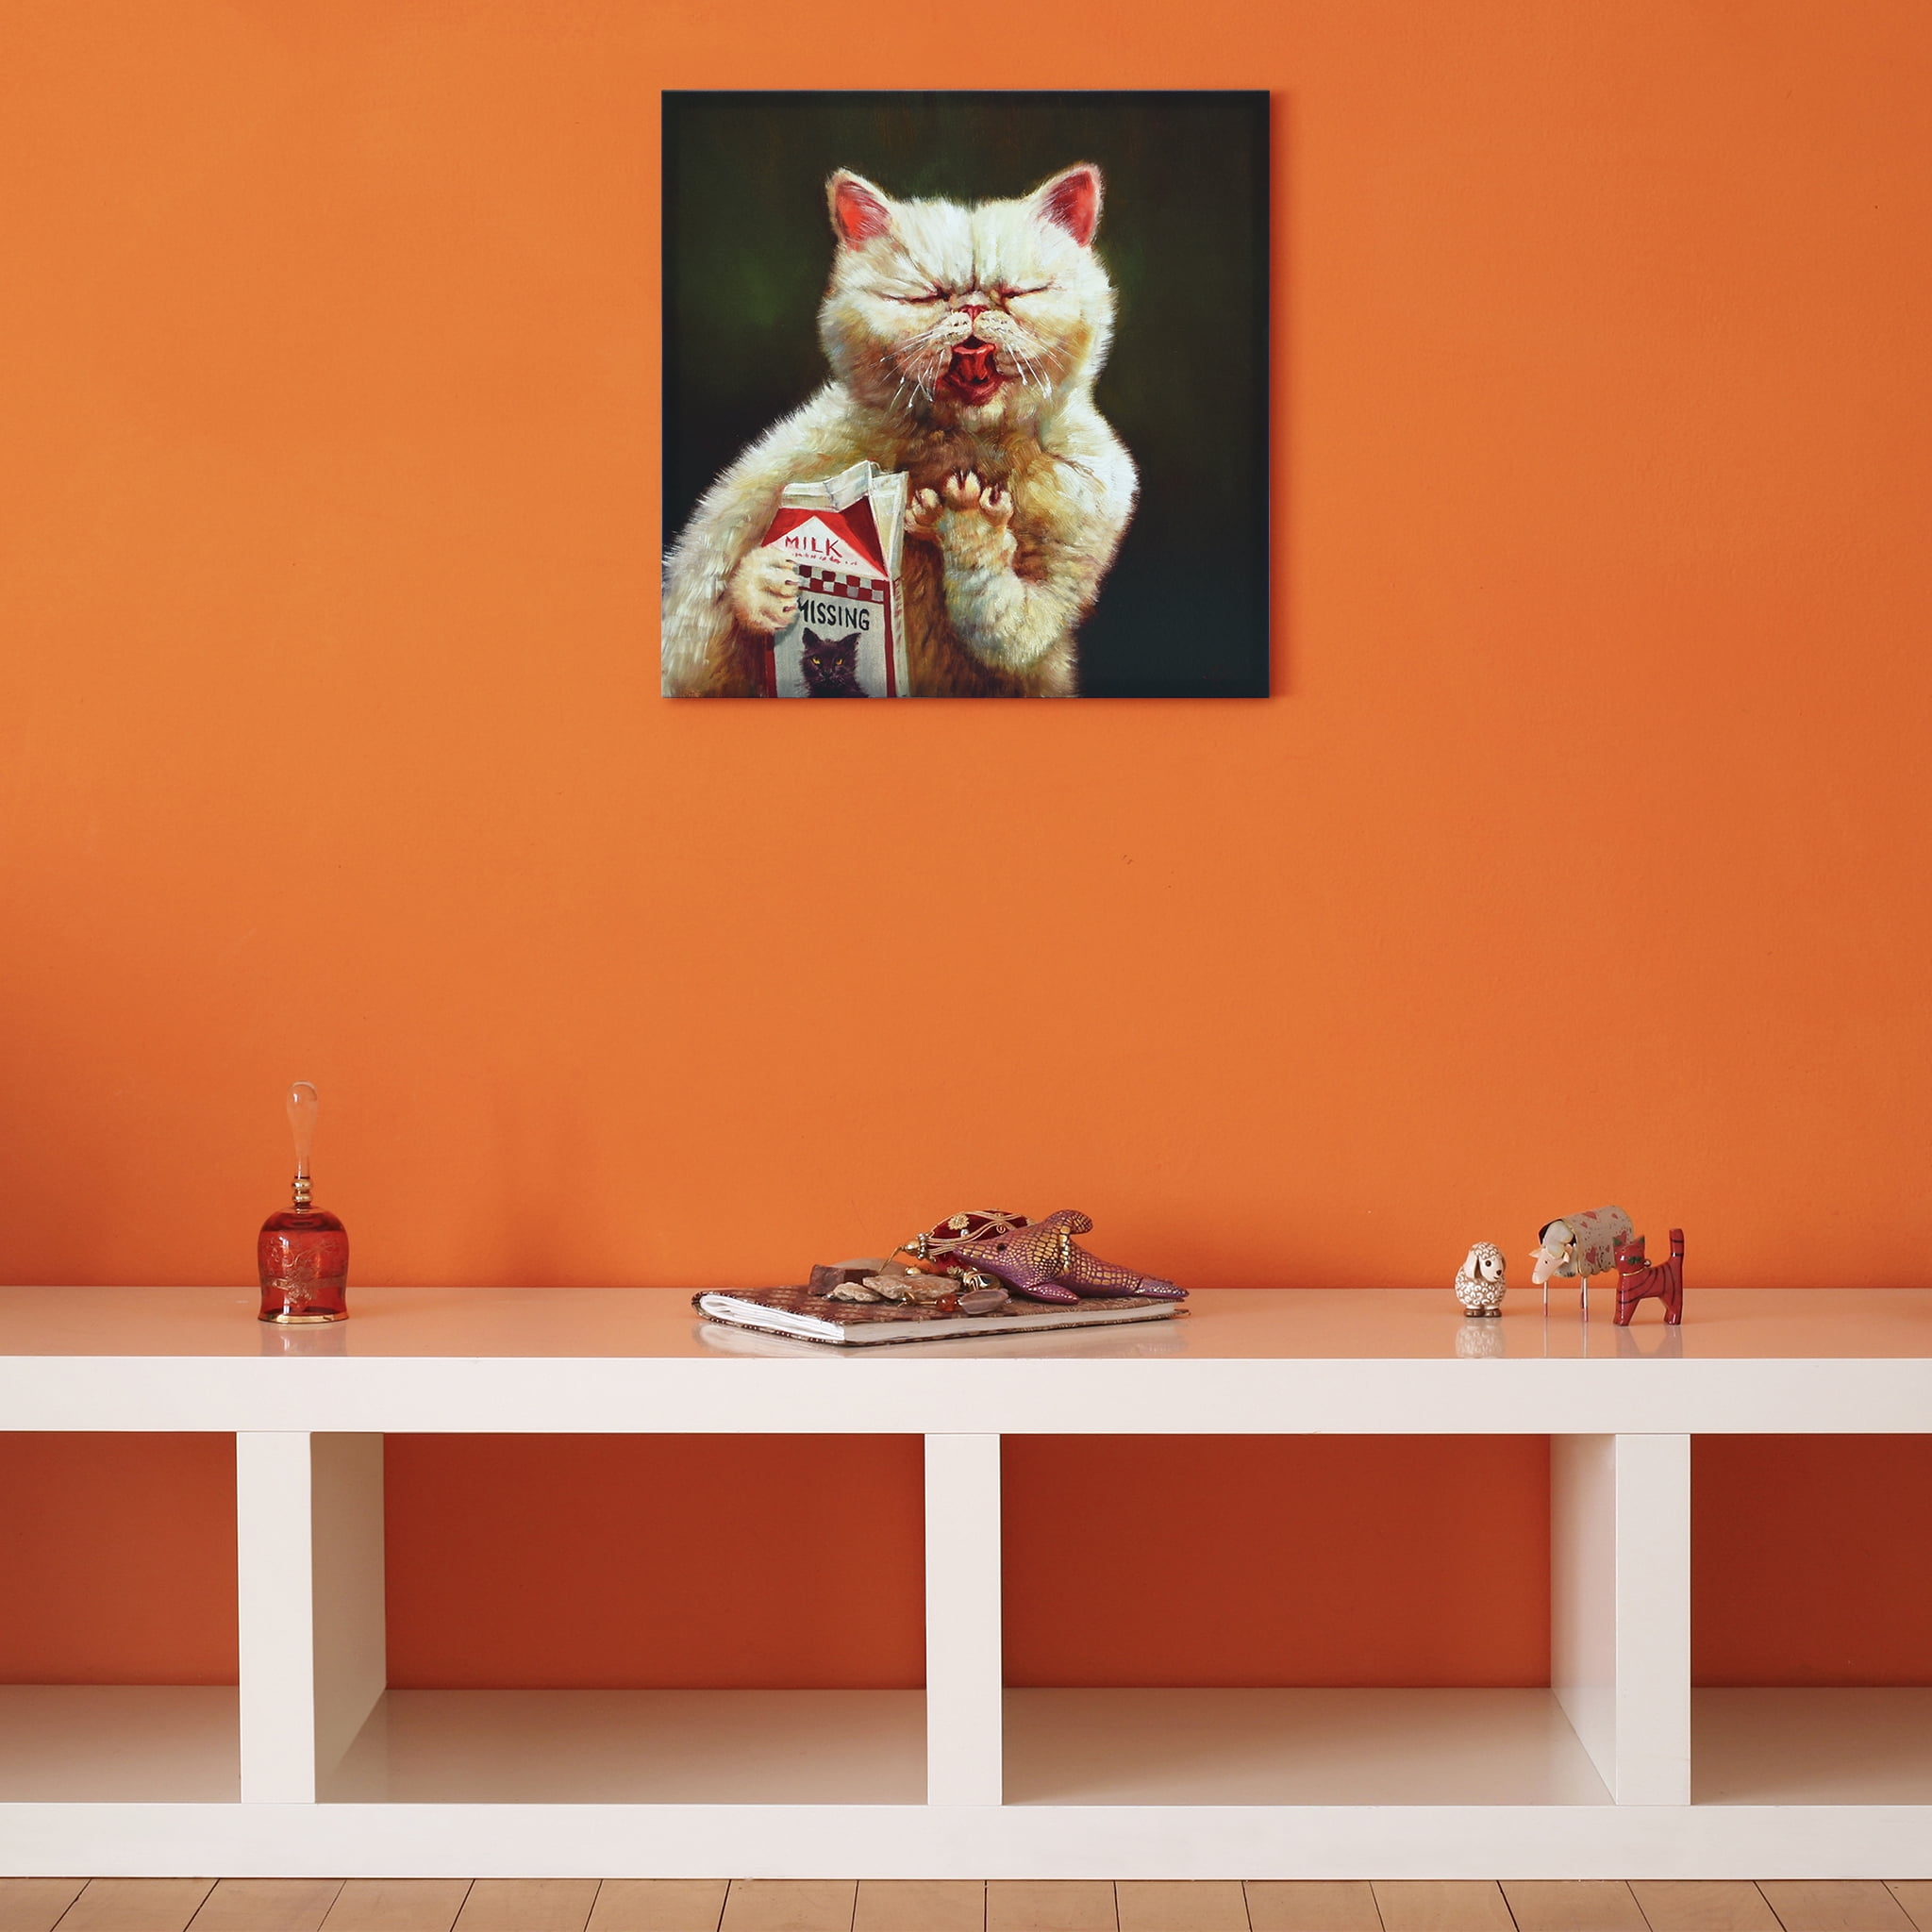  Empire Art Direct Throne Cat Pet Wall, Graphic Art Print on  Wrapped Canvas Contemporary,Ready to Hang,Living Room,Bedroom ＆ Office, 18  x 2 x 18 : Everything Else